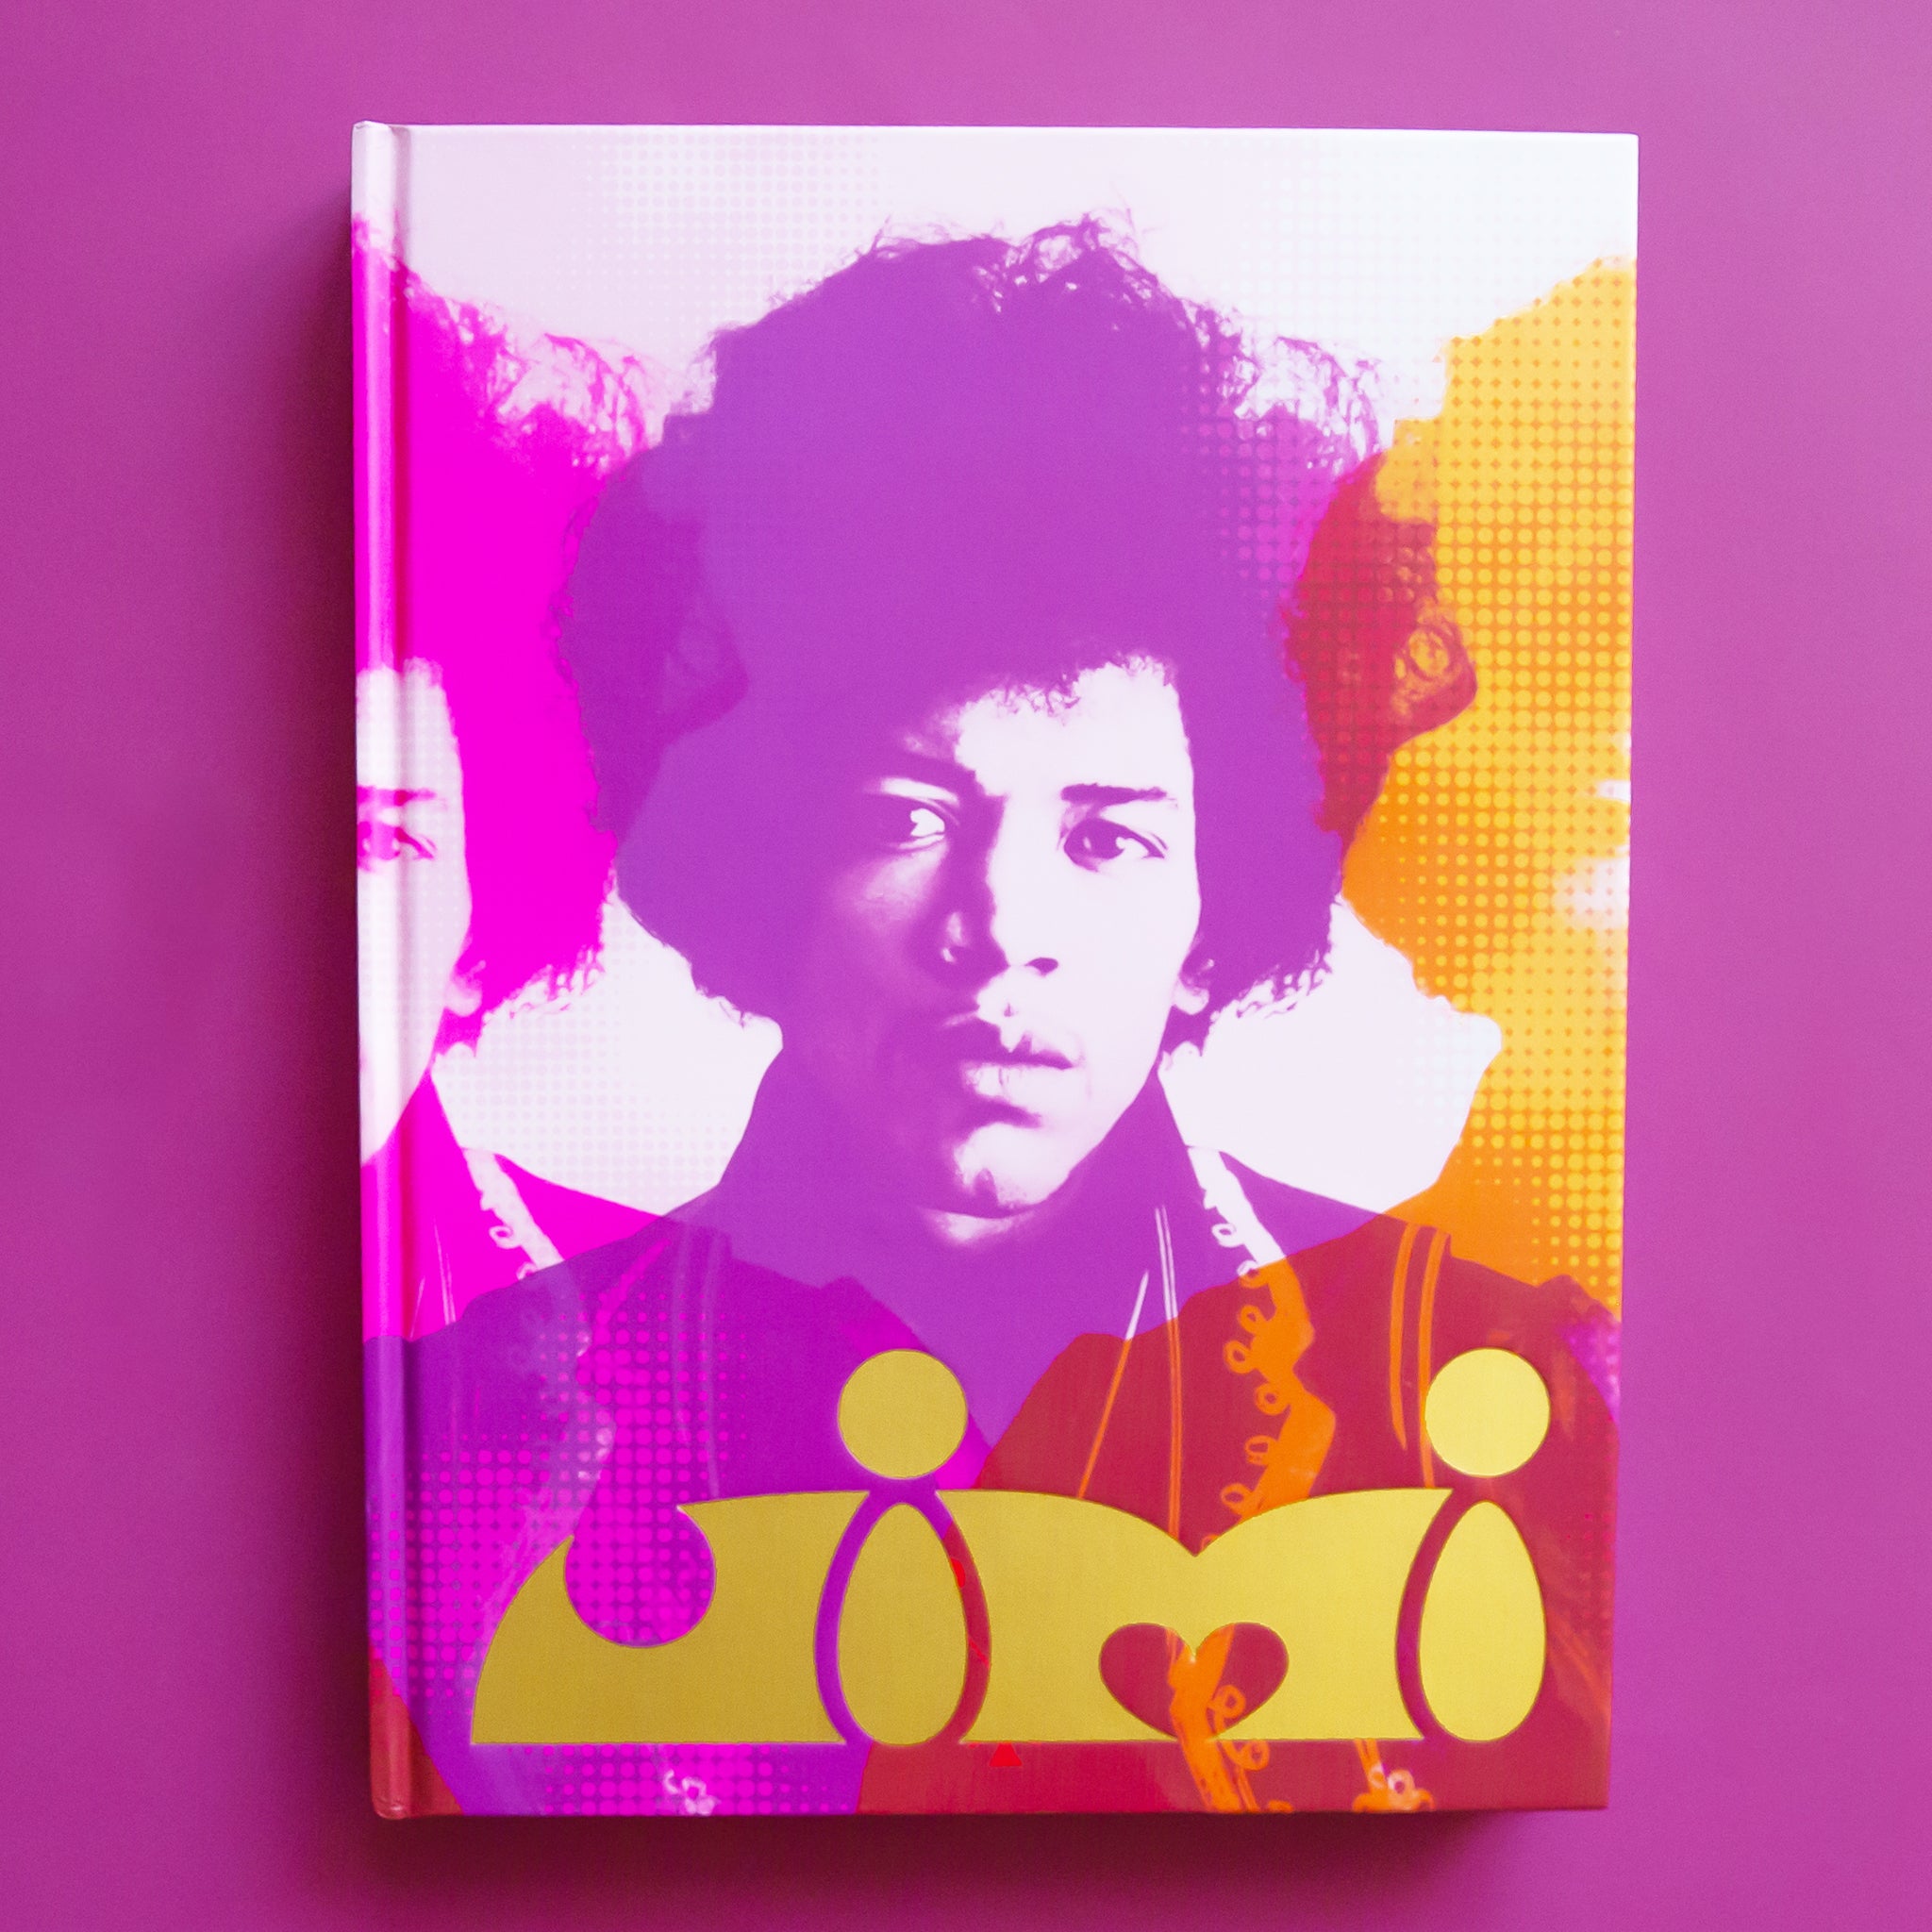 On a purple background is a purple, pink and orange book cover with a Jimi Hendrix photo and text on the bottom that reads, "jimi".